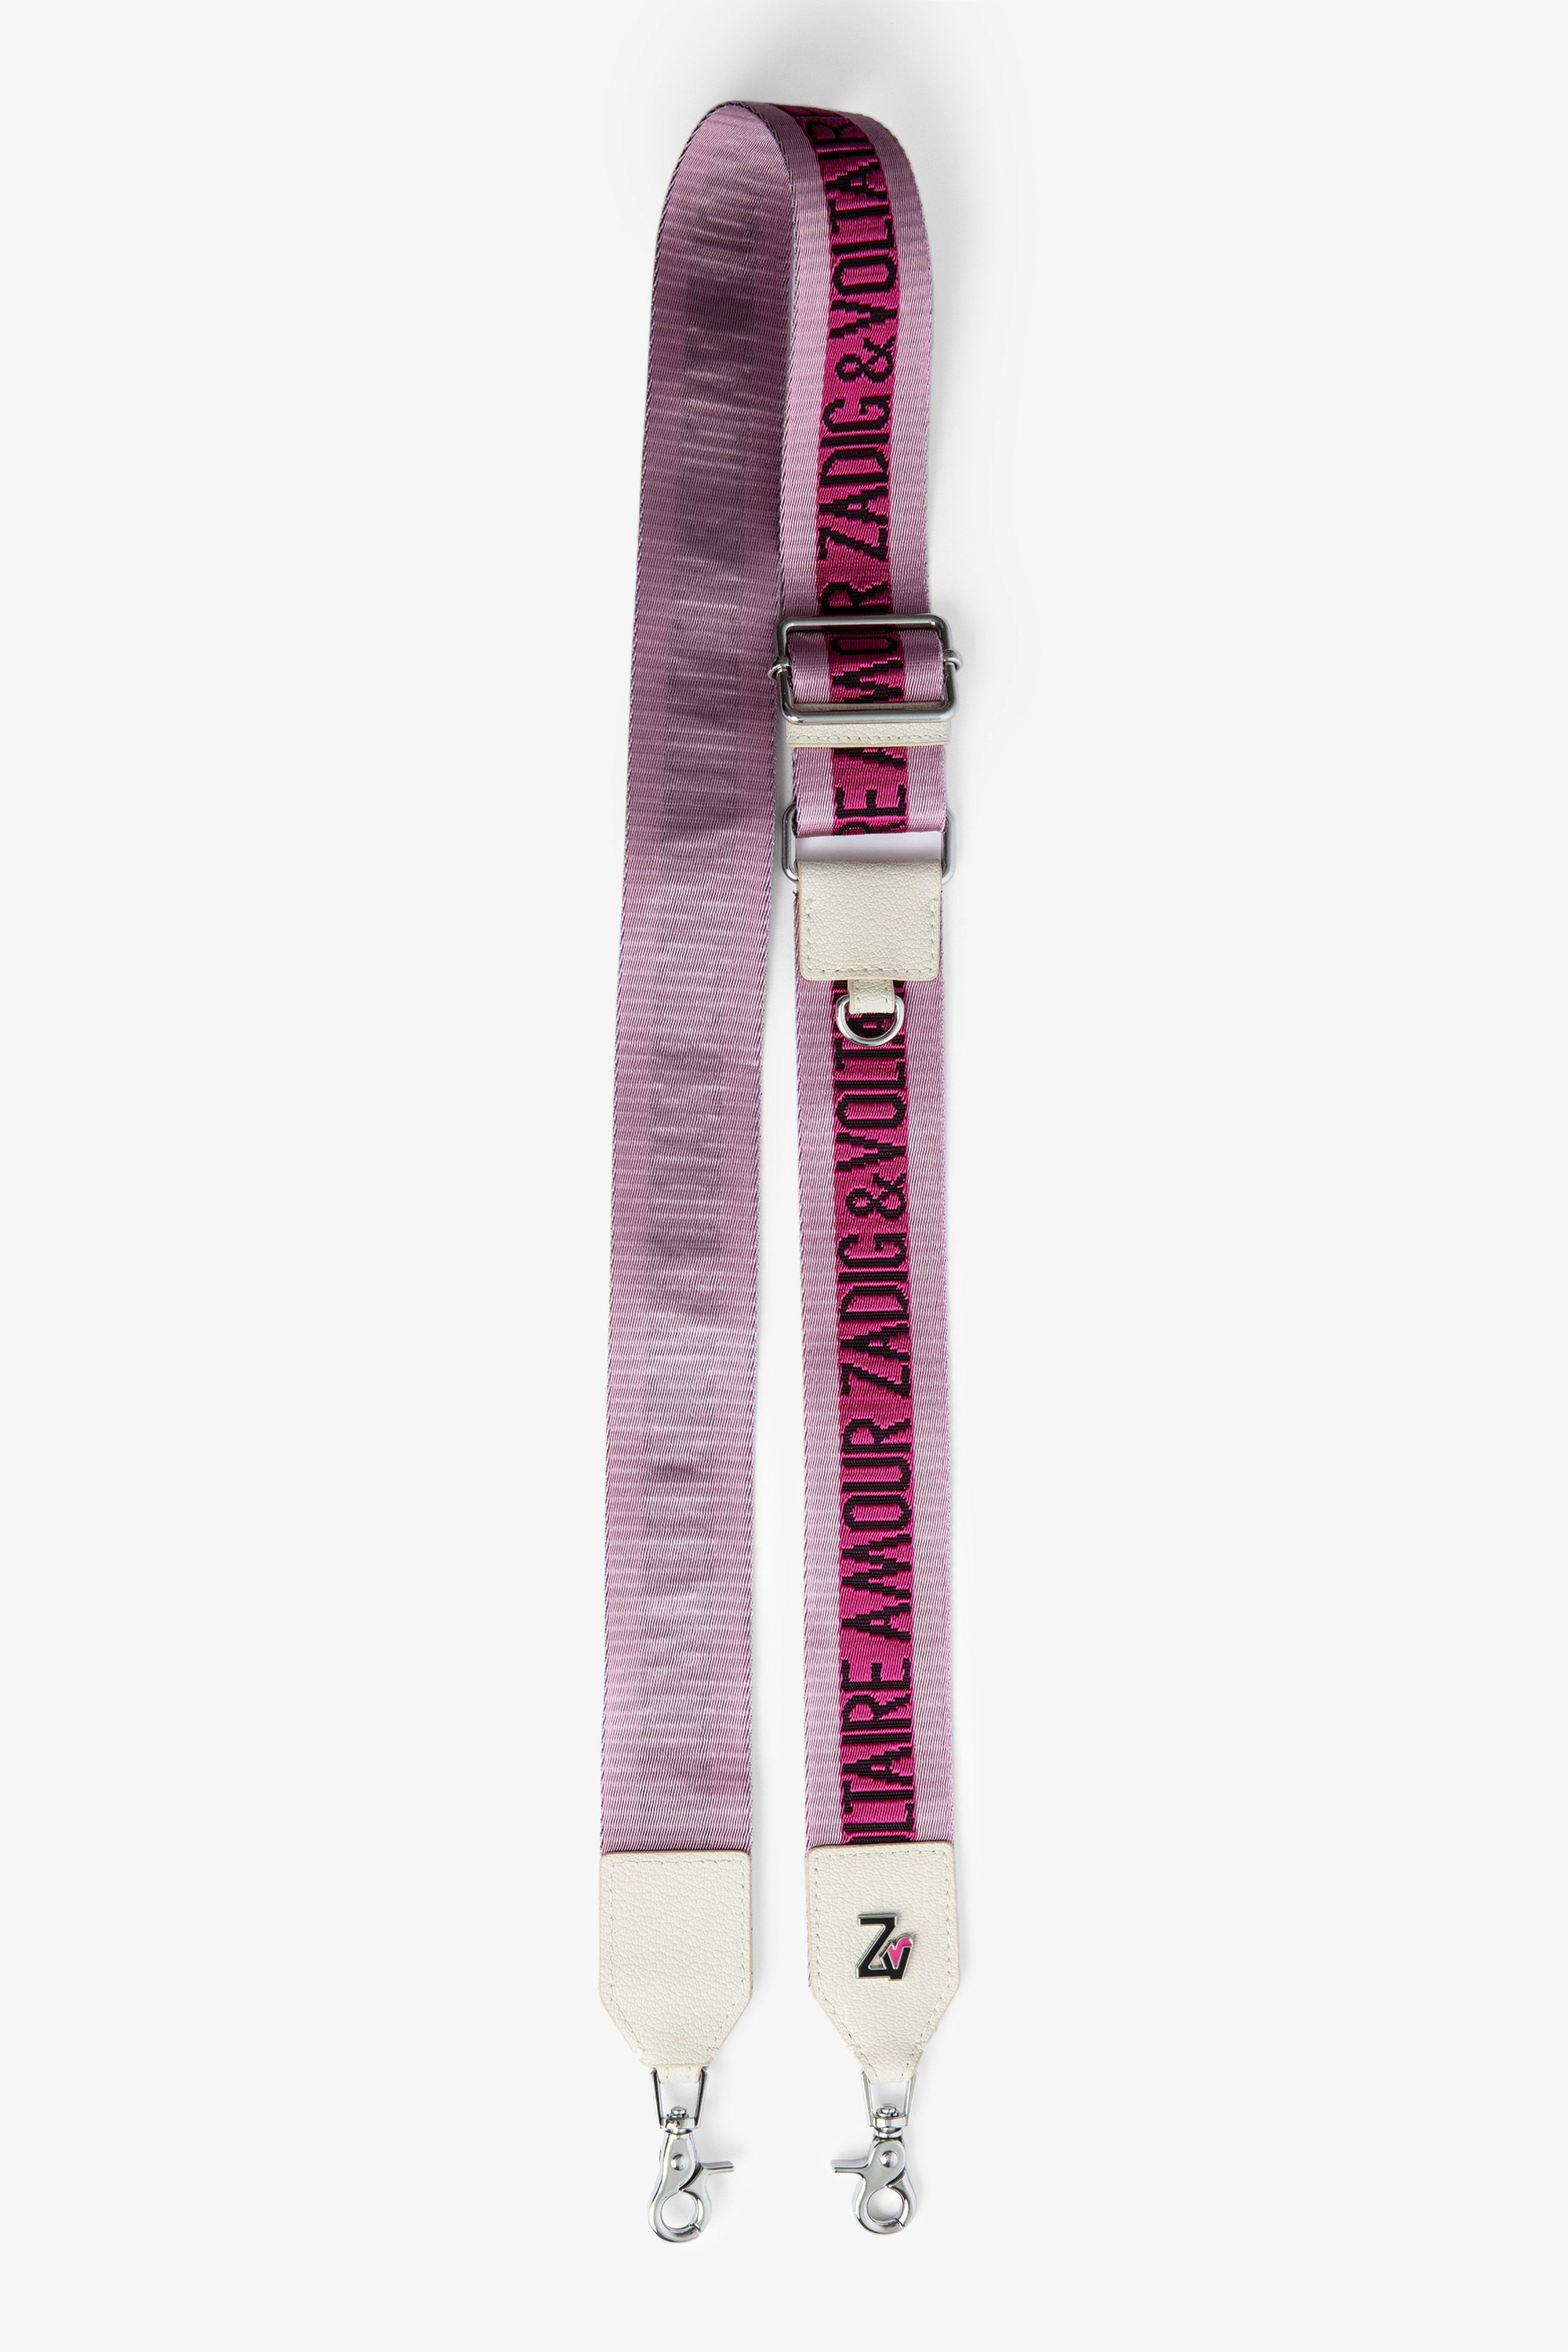 ZV Crush ストラップ Women’s adjustable shoulder strap in pink leather and jacquard